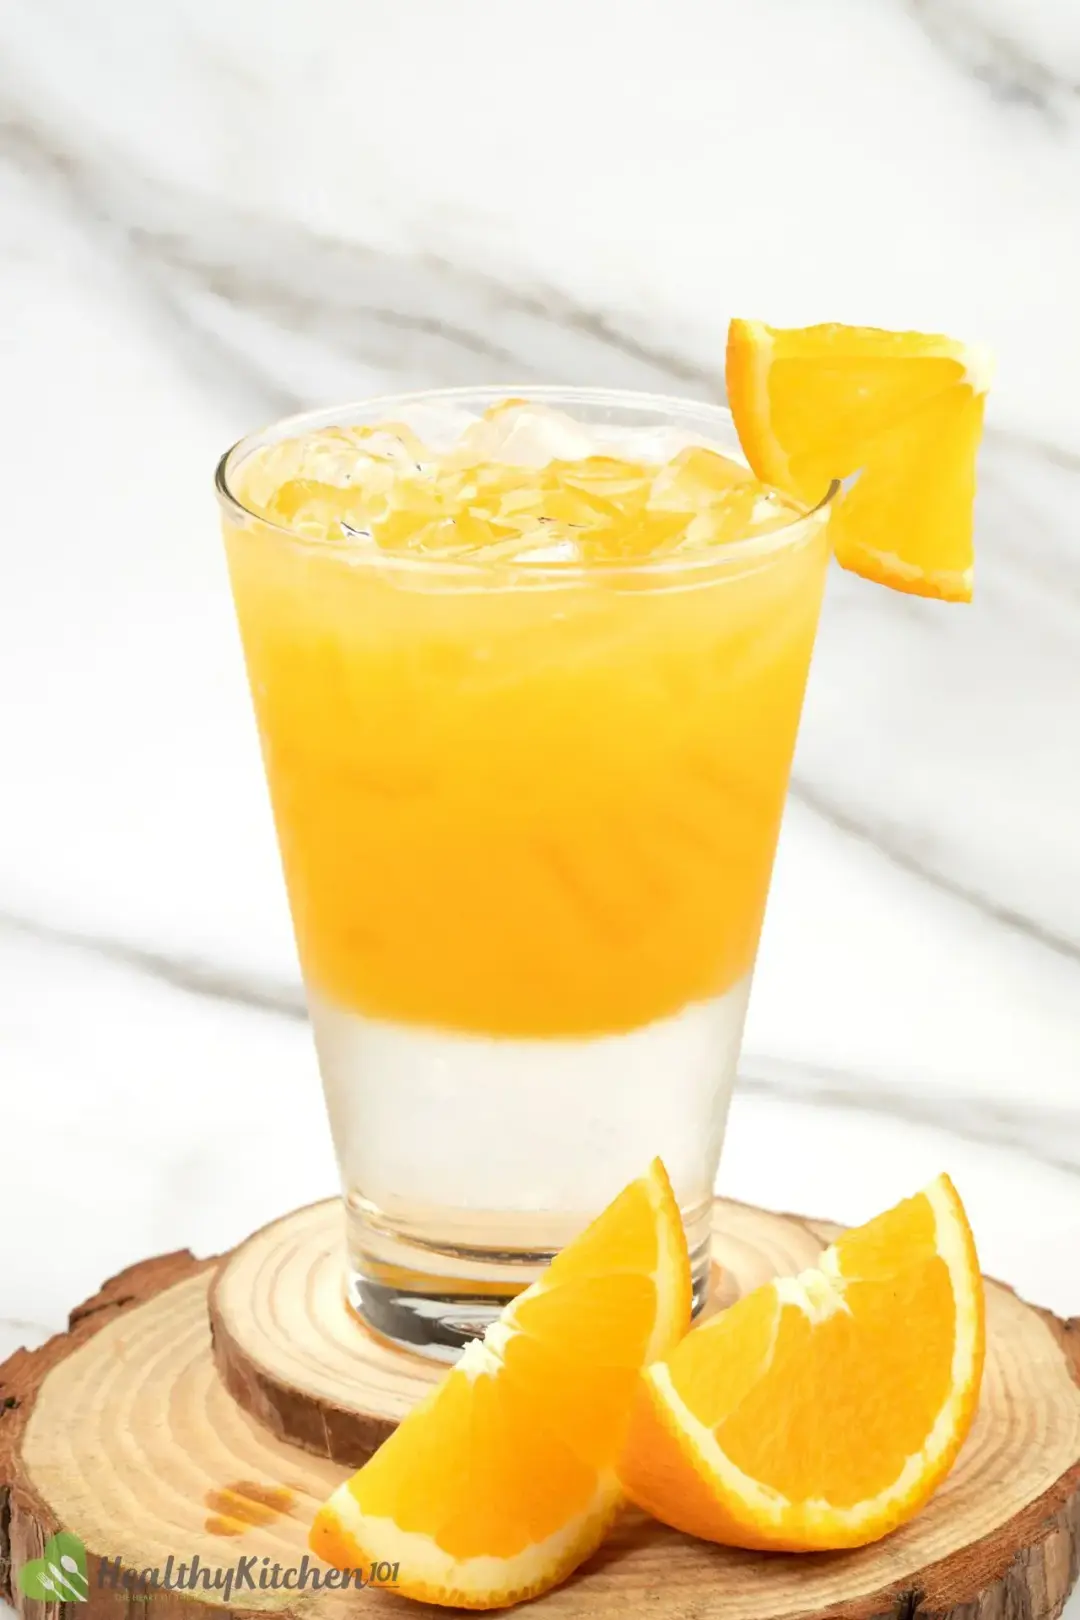 A glass of orange juice vodka and sugar syrup separated in two layers, garnished with orange wedges